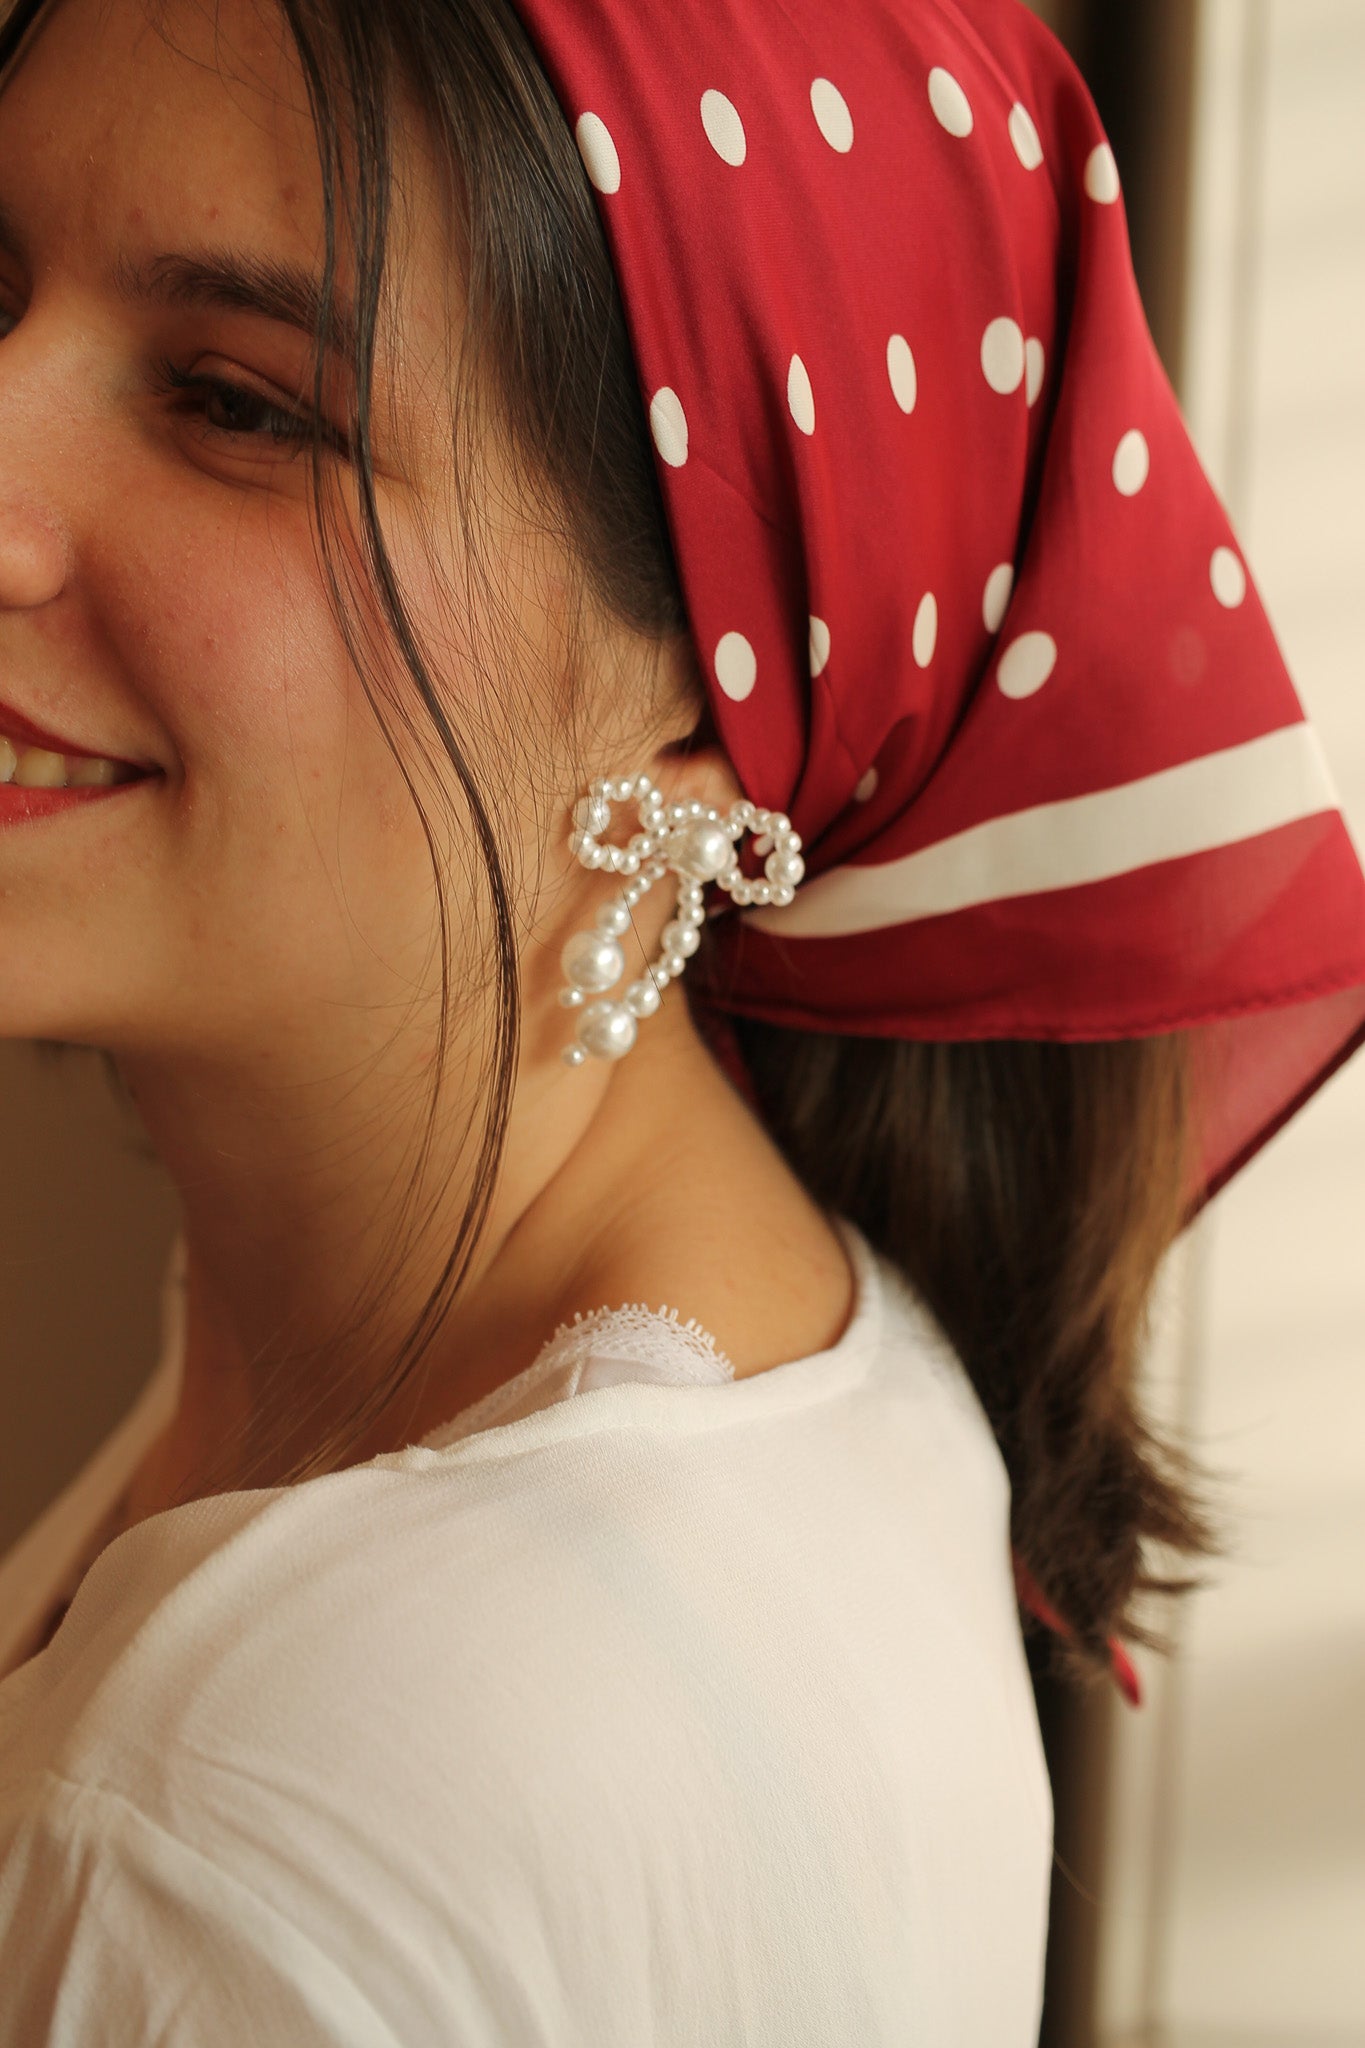 Audrey Bandana in Red and White Dots